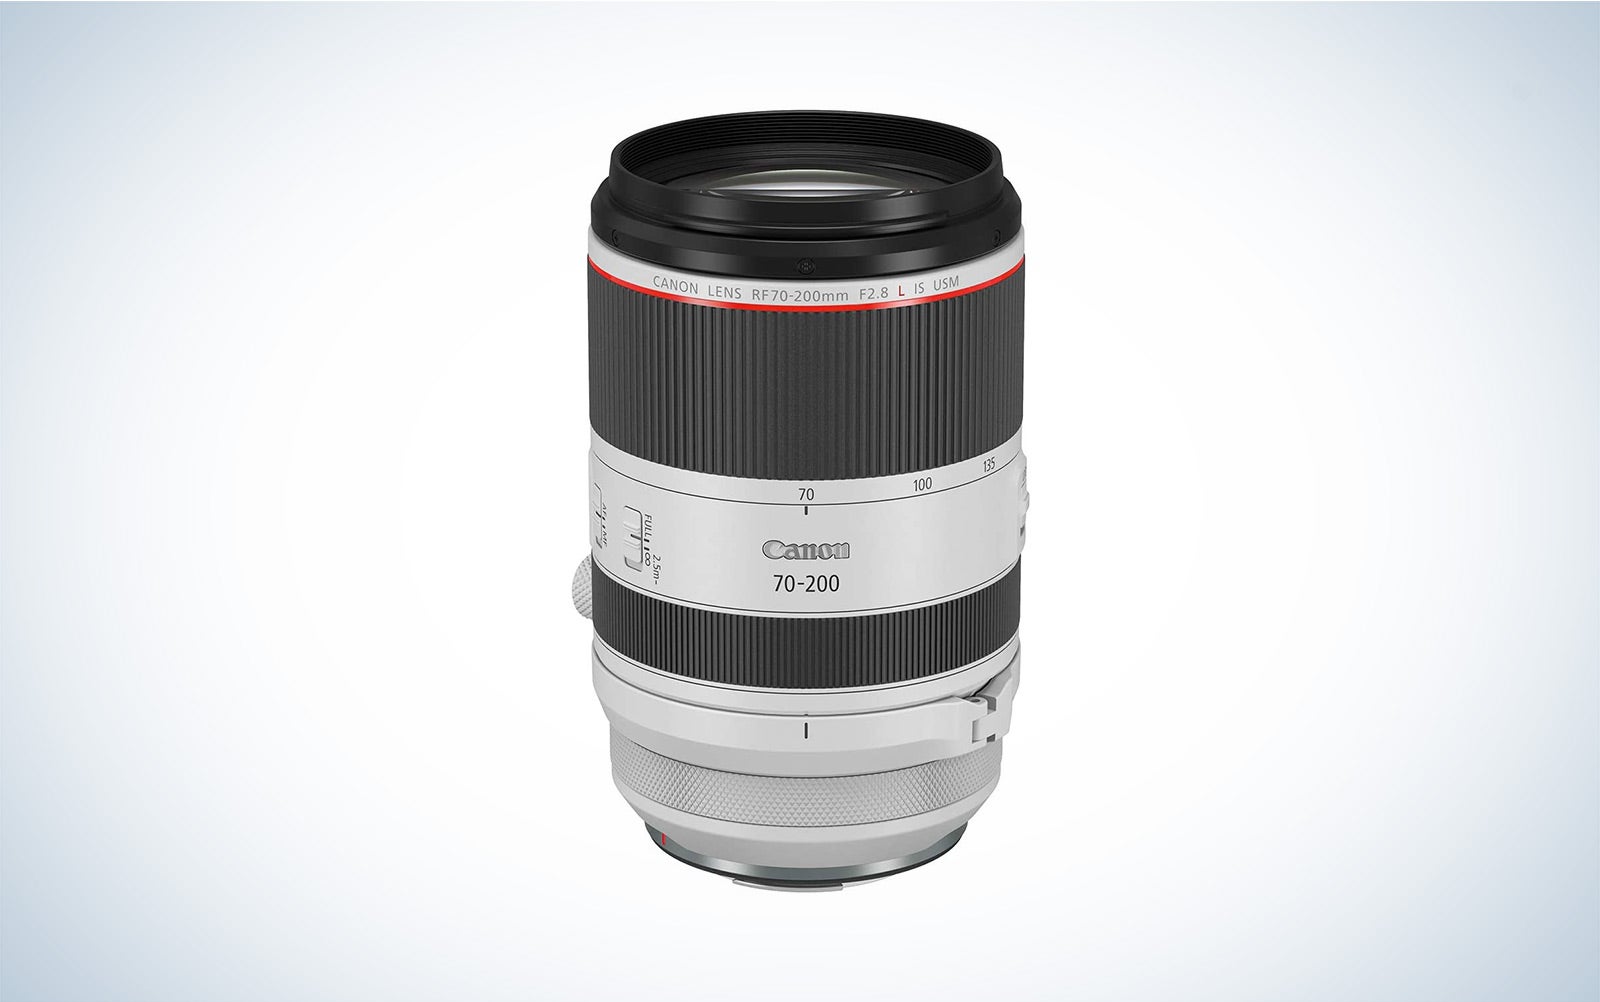 The Canon Canon RF 70-200mm F2.8 L IS USM Lens is the best telephoto for Canon mirrorless cameras.